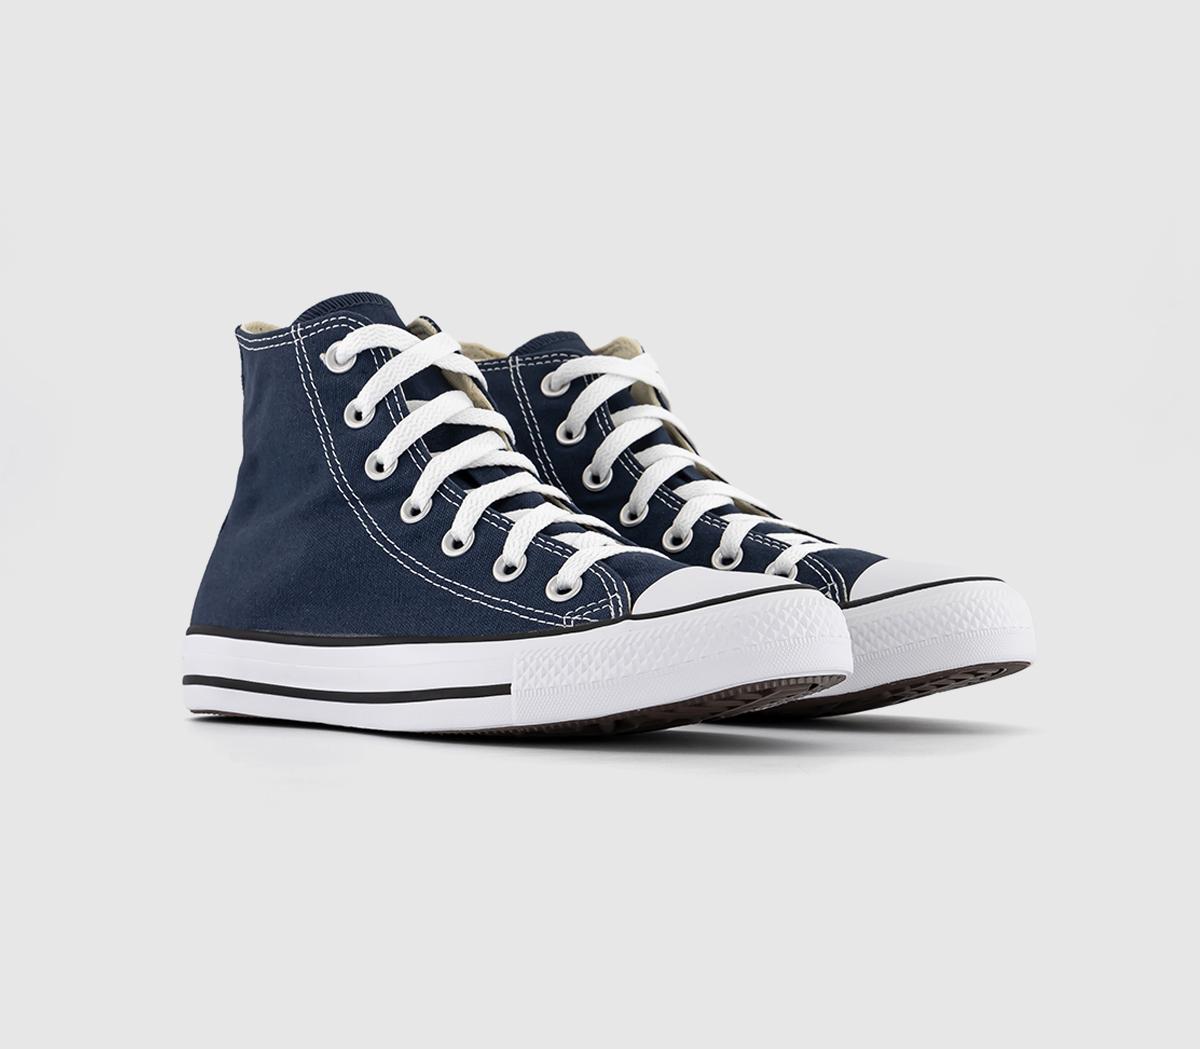 Mens Converse All Star Hi Navy Canvas Trainers, 5.5